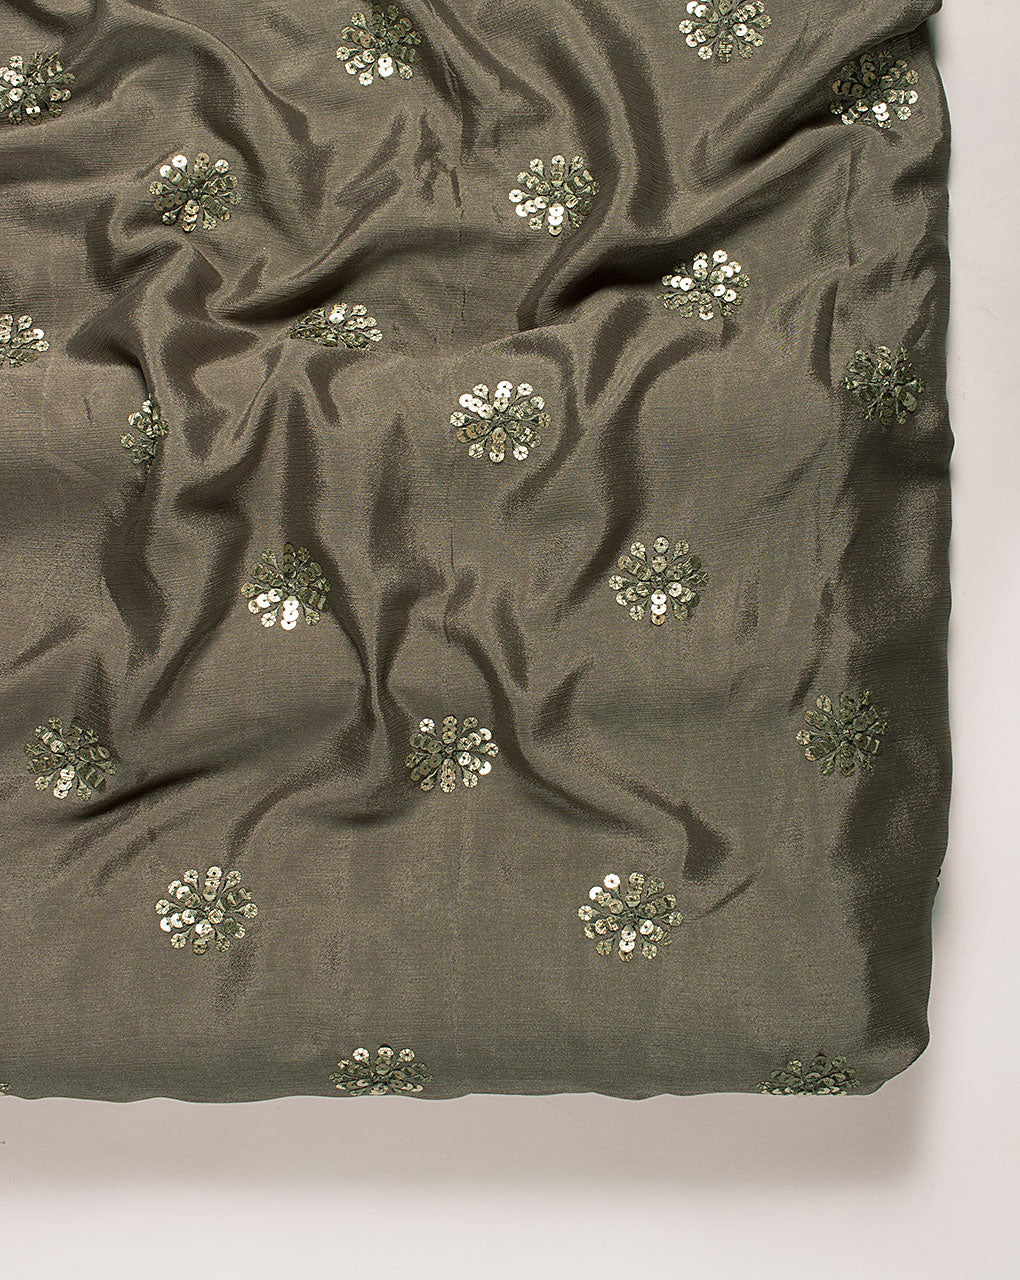 Embroidered Sequins Work Chinnon Chiffon Fabric